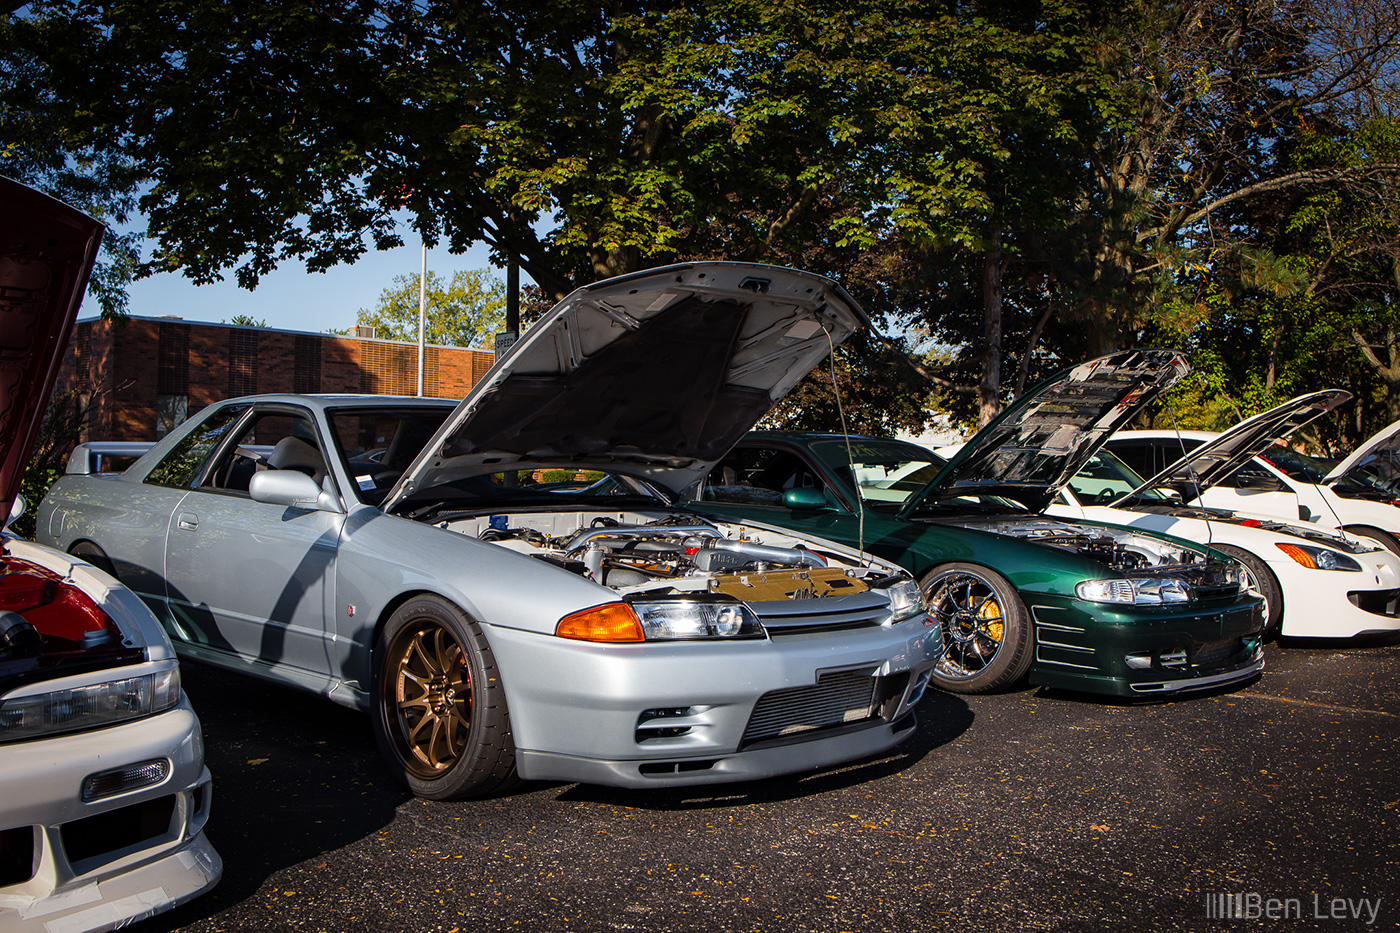 R32 Skyline GT-R and S14 240SX at Touge Factory